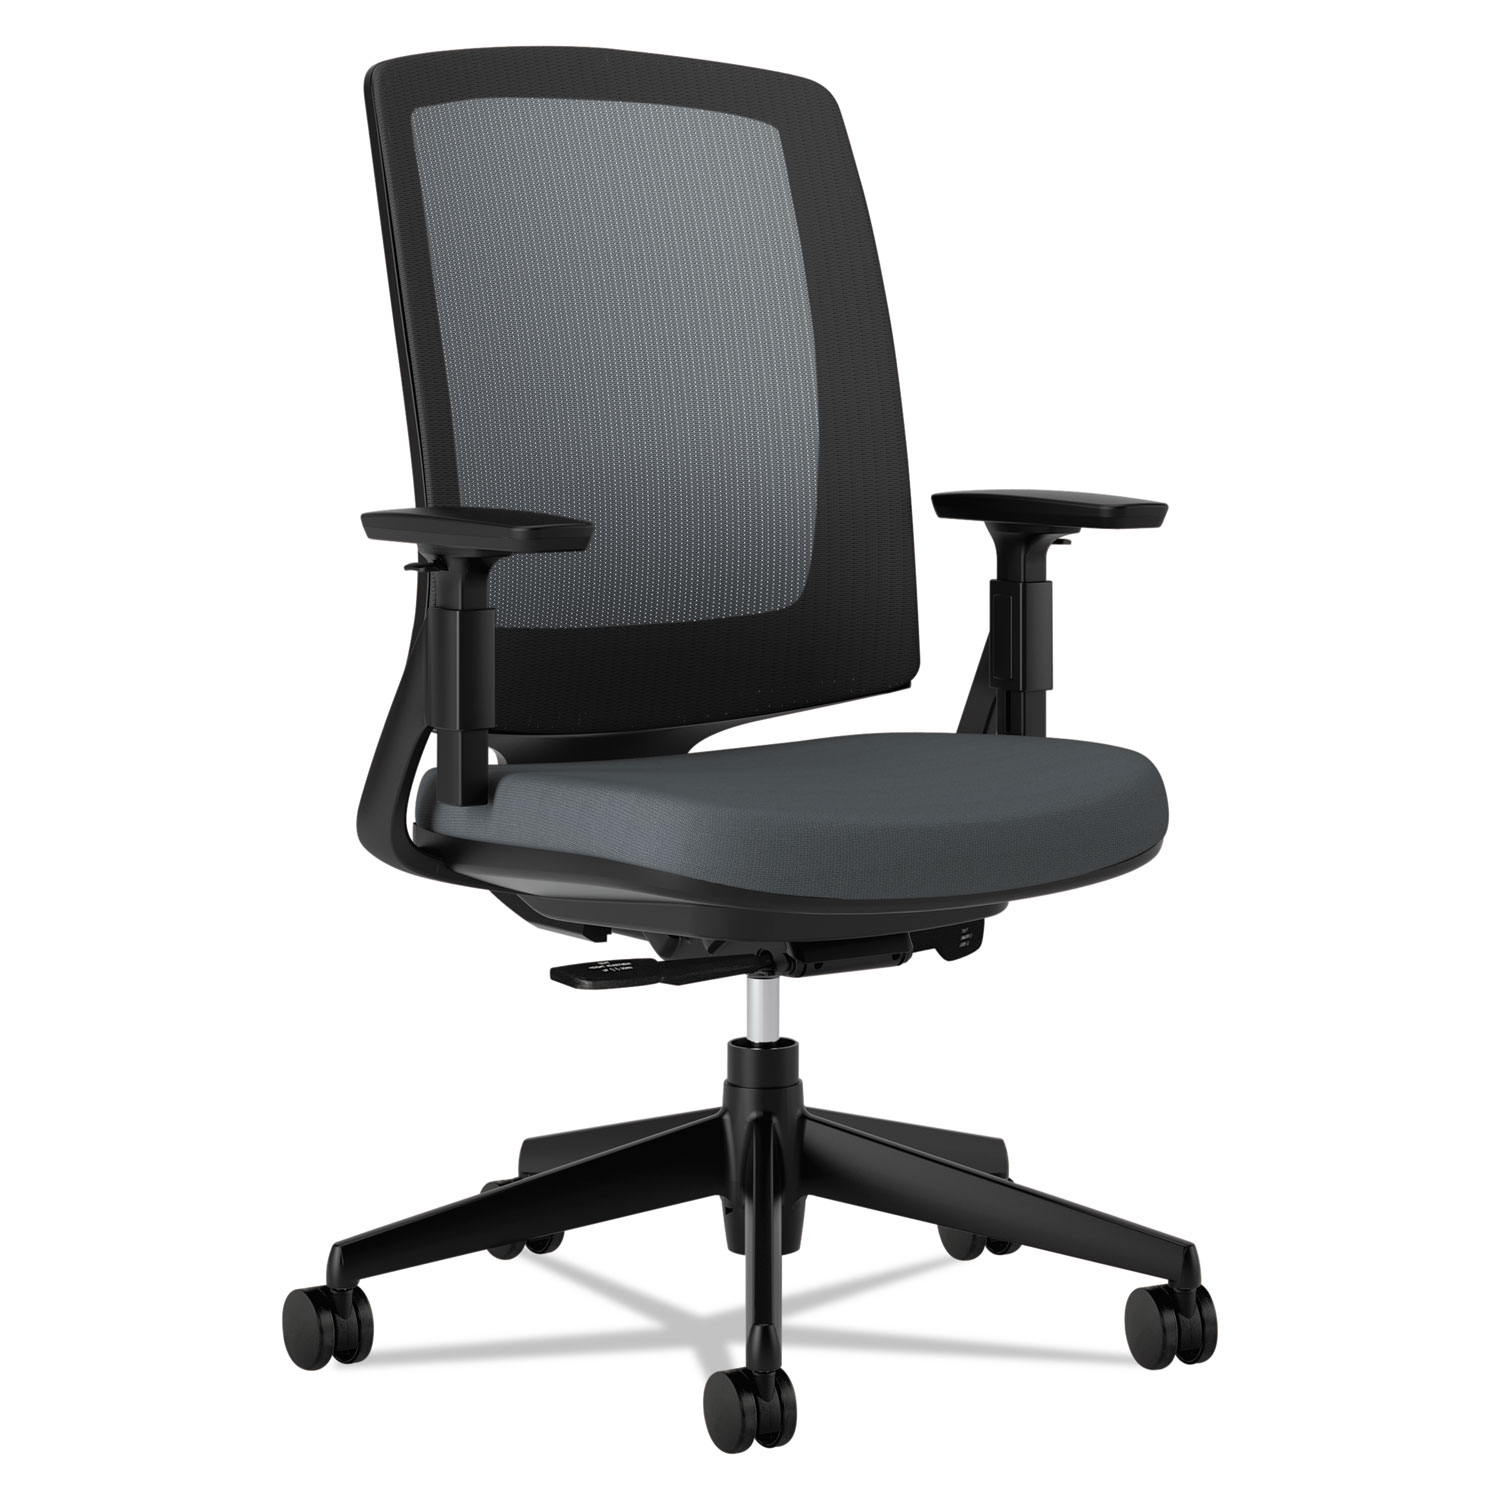  HON H2281.VA19.T Lota Series Mesh Mid-Back Work Chair, Supports up to 250 lbs., Charcoal Seat/Charcoal Back, Black Base (HON2281VA19T) 